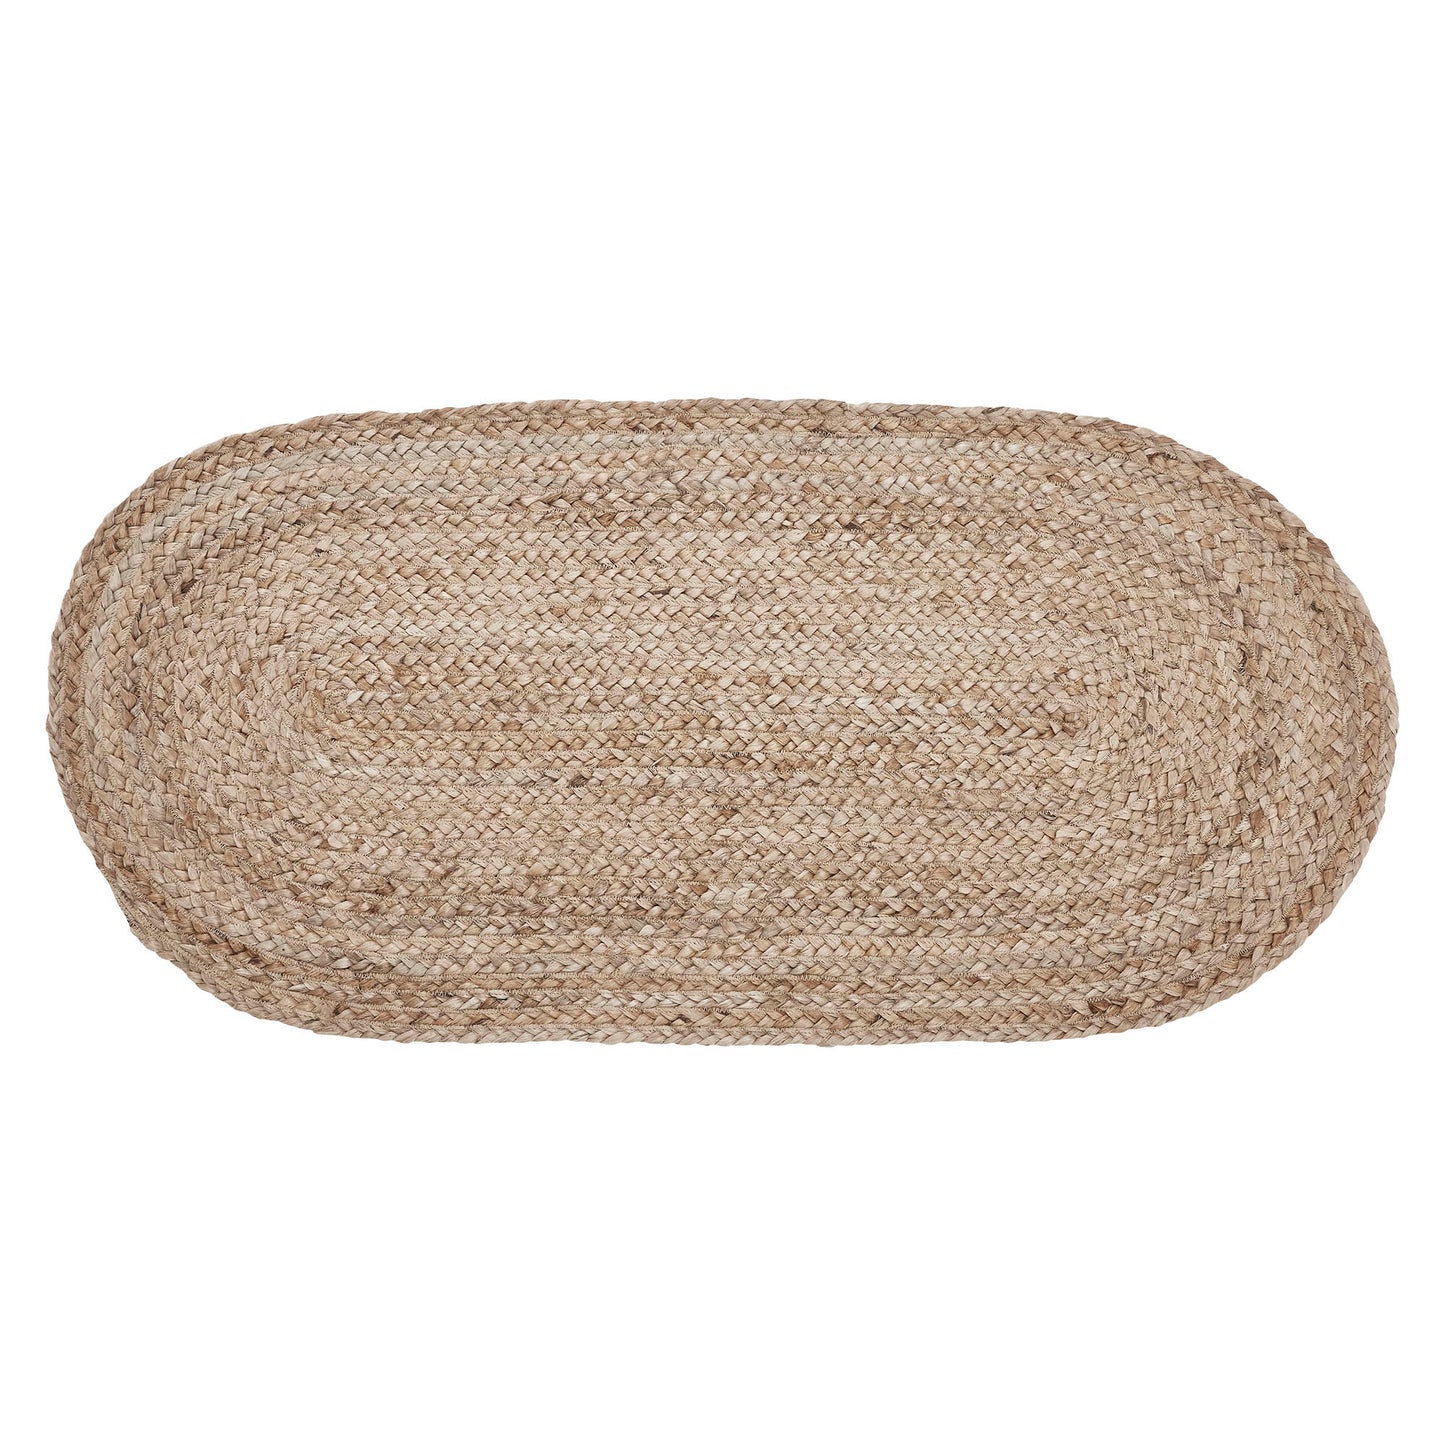 VHC Brands Jute Rug 17x36 w/ Pad, Jute Area Rug, Accent Rug, Floor Decor, Braided, Natural Jute Collection, Oval 17x36, Natural